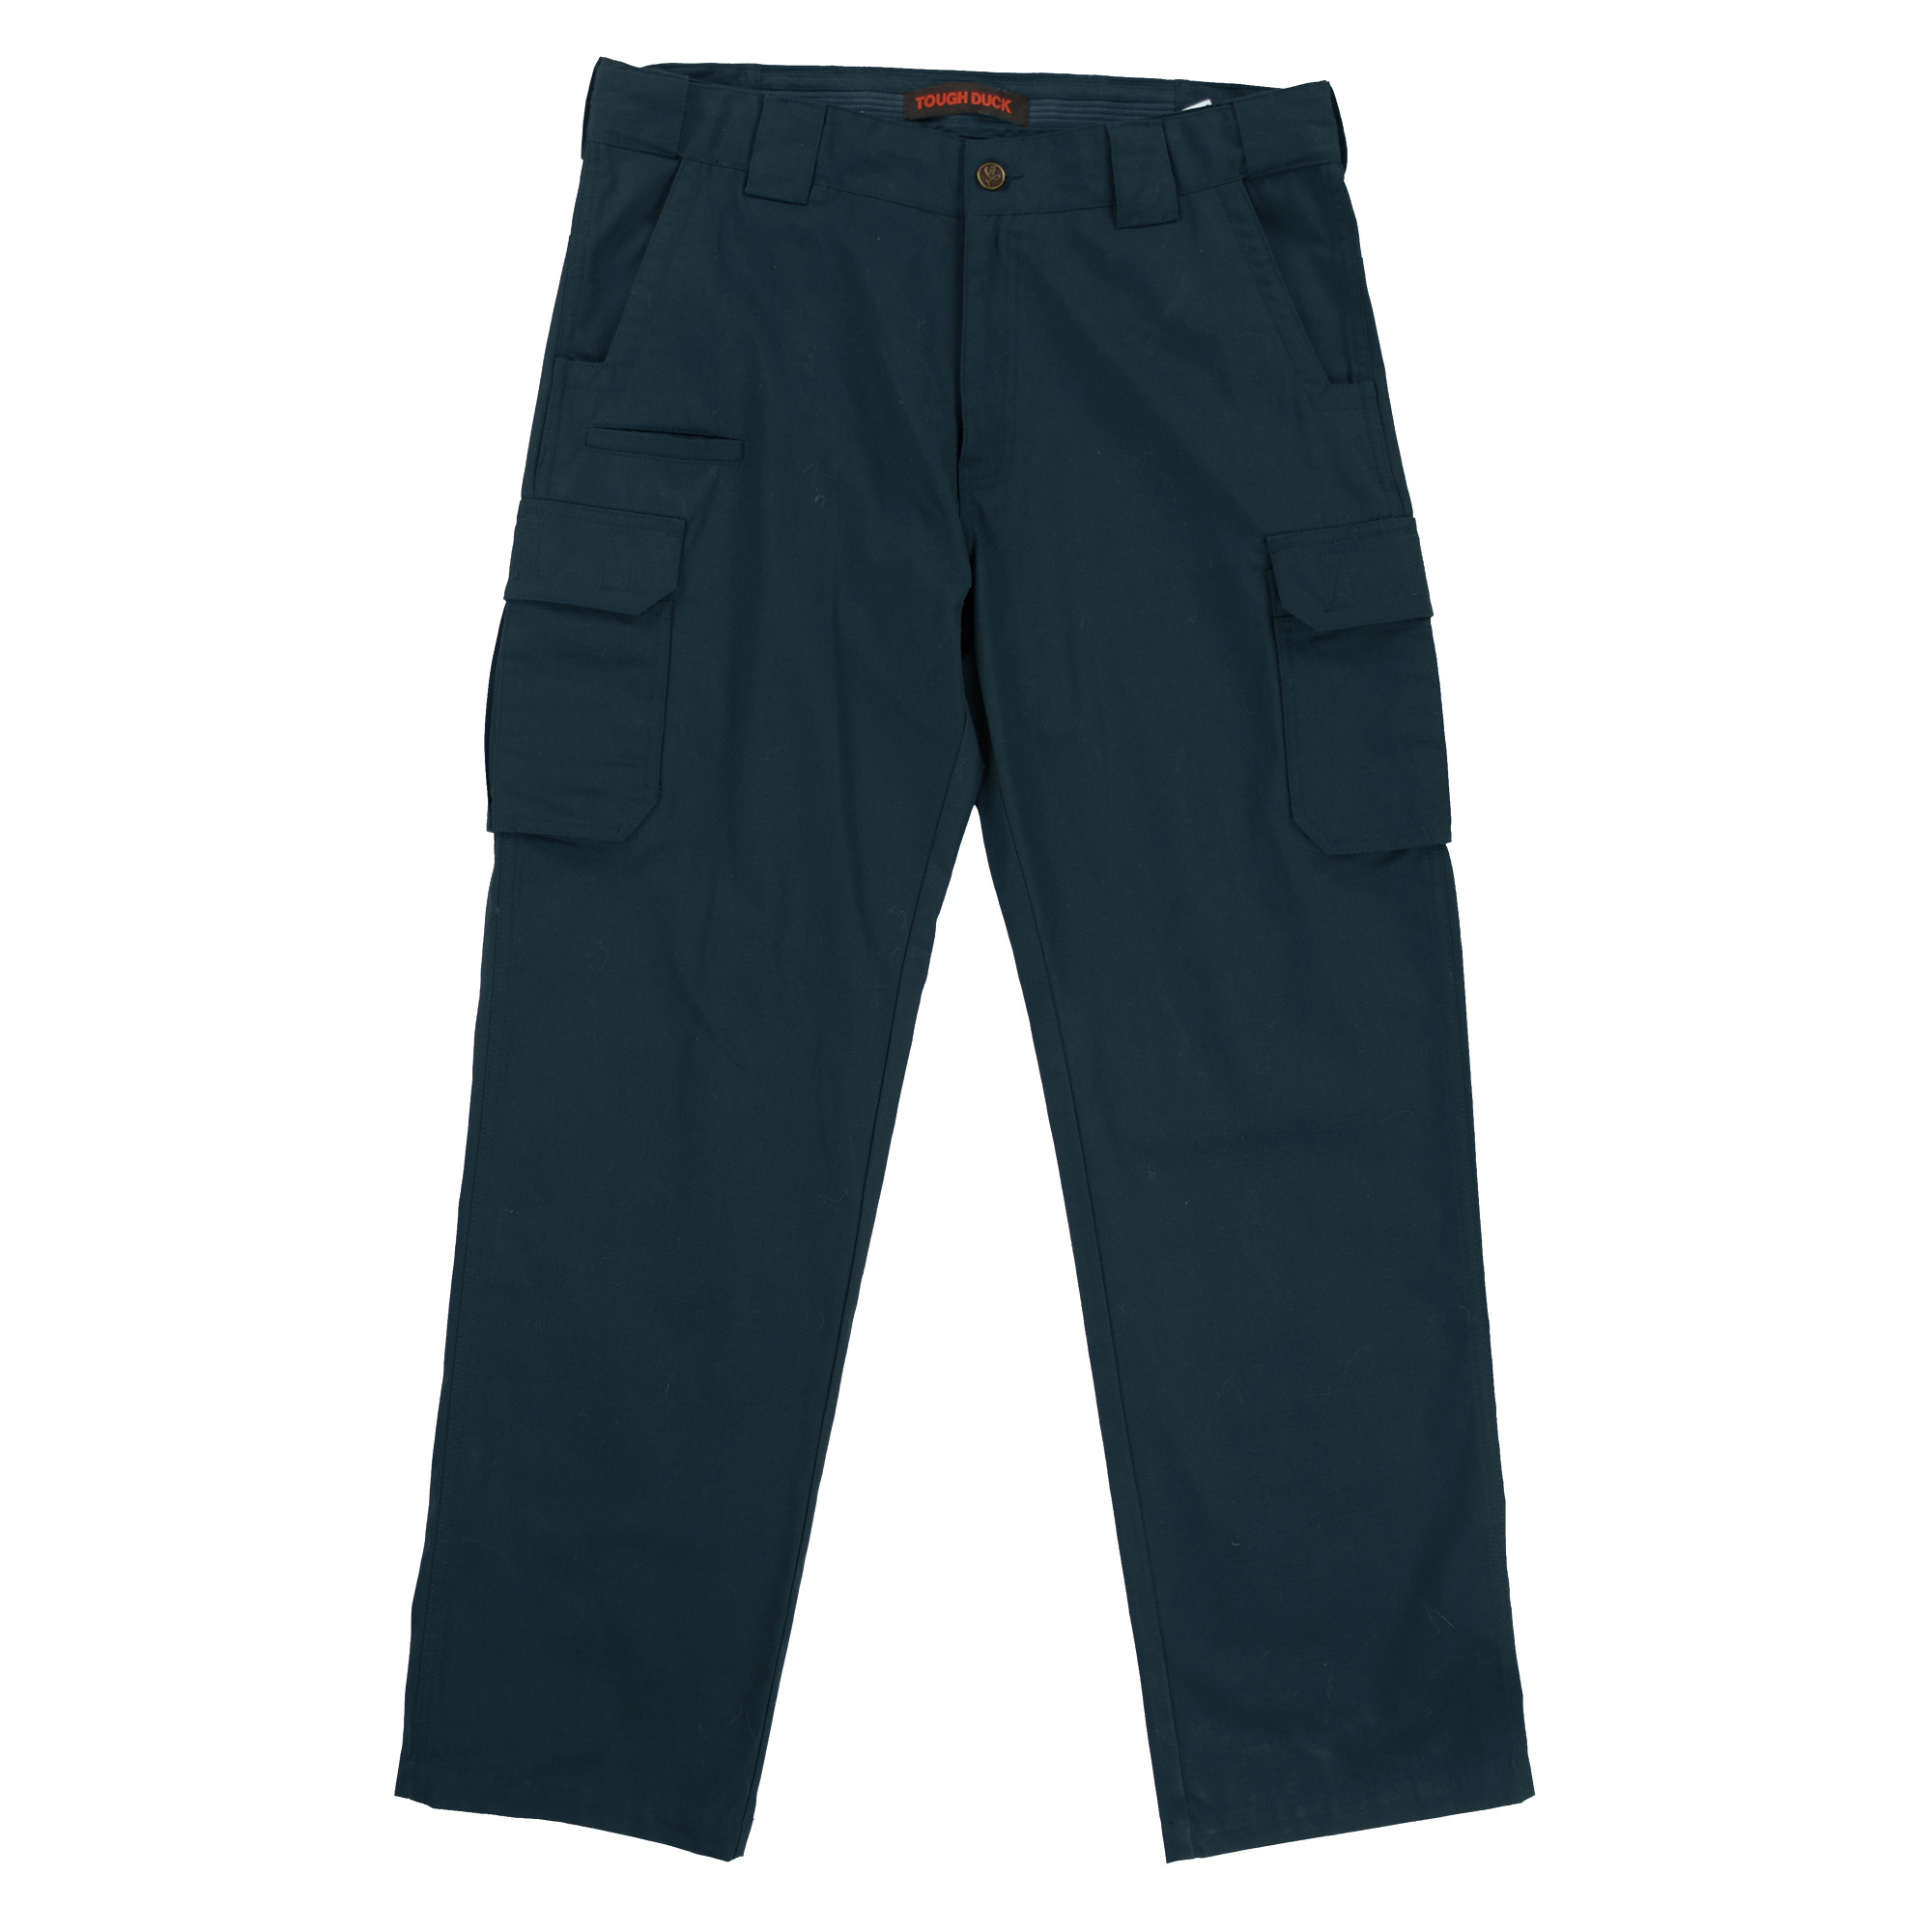 Tough Duck, Ripstop Cargo Pant, Waist 48 in, Inseam 30 in, Color Navy, Model WP110